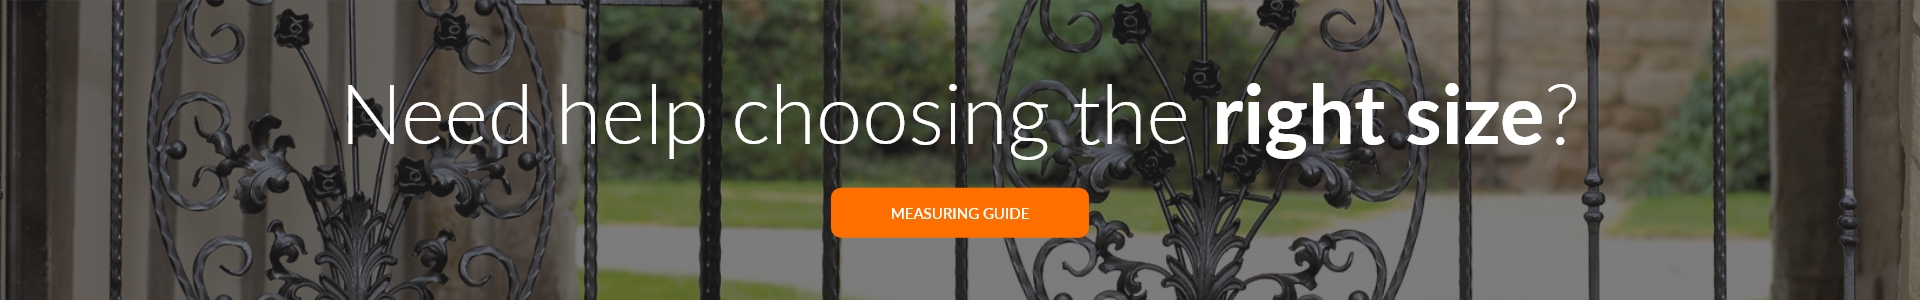 View the driveway gates measuring guide here